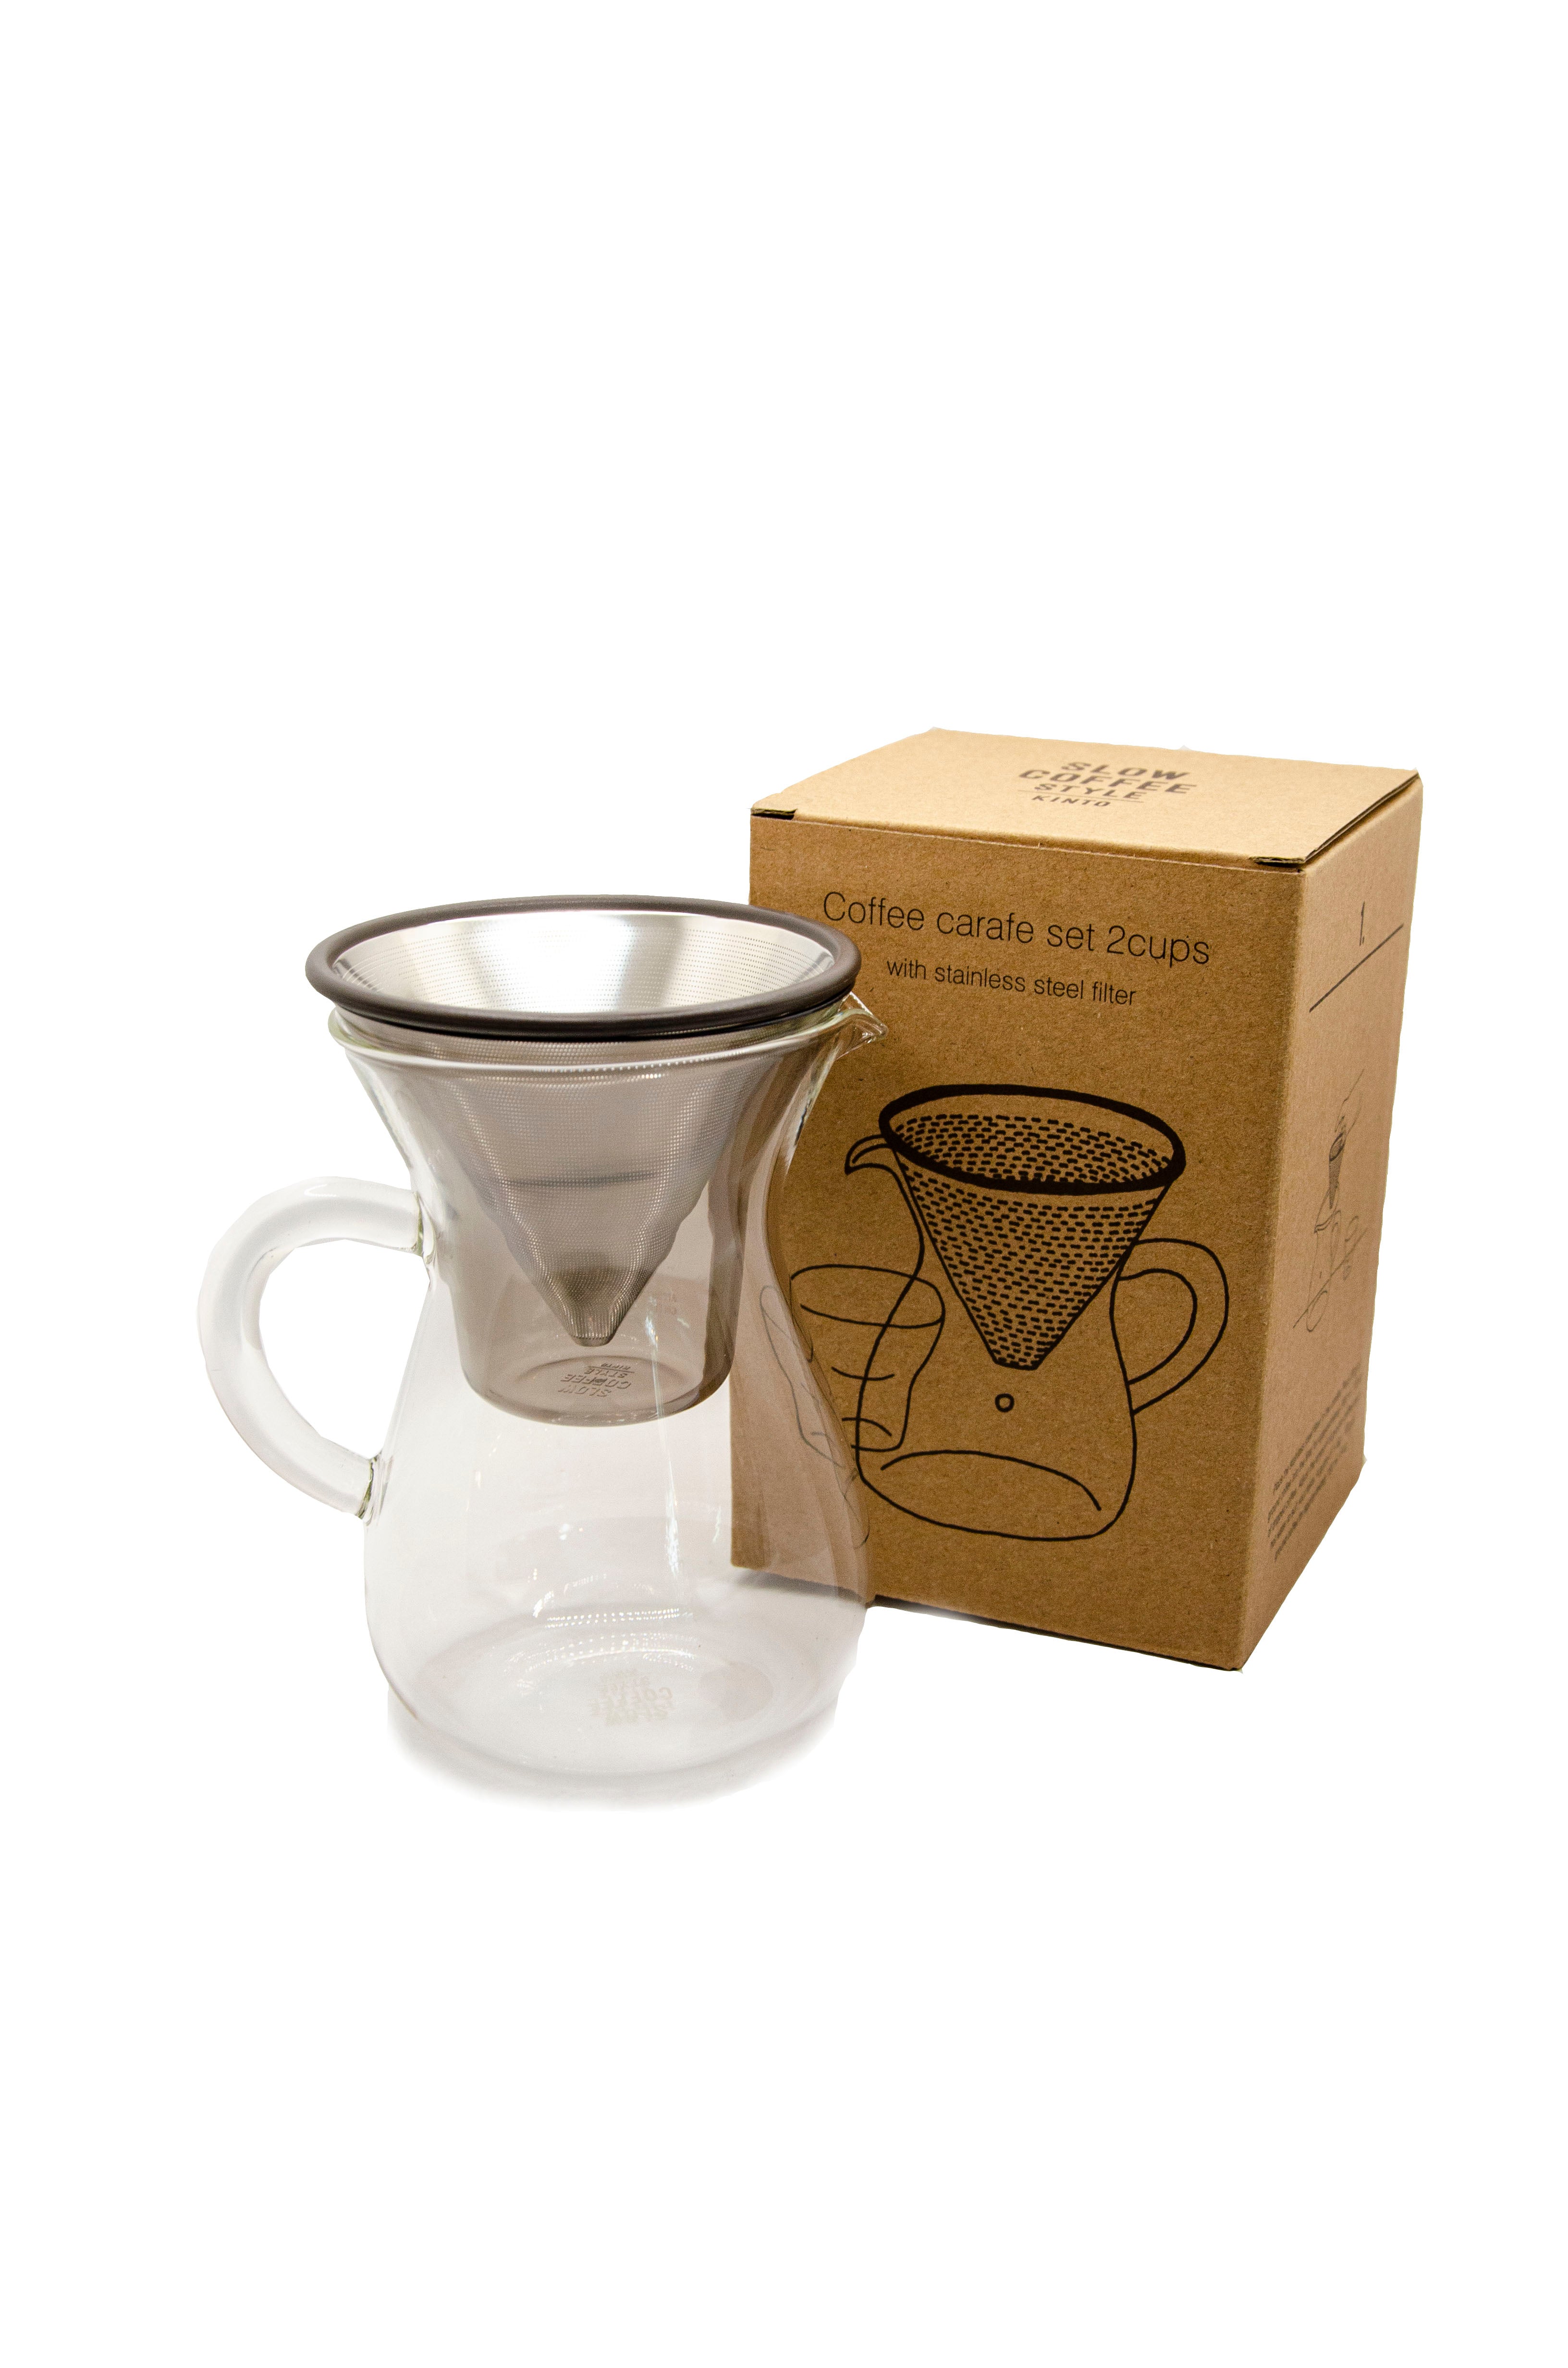 KINTO Coffee Carafe for Filter Coffee